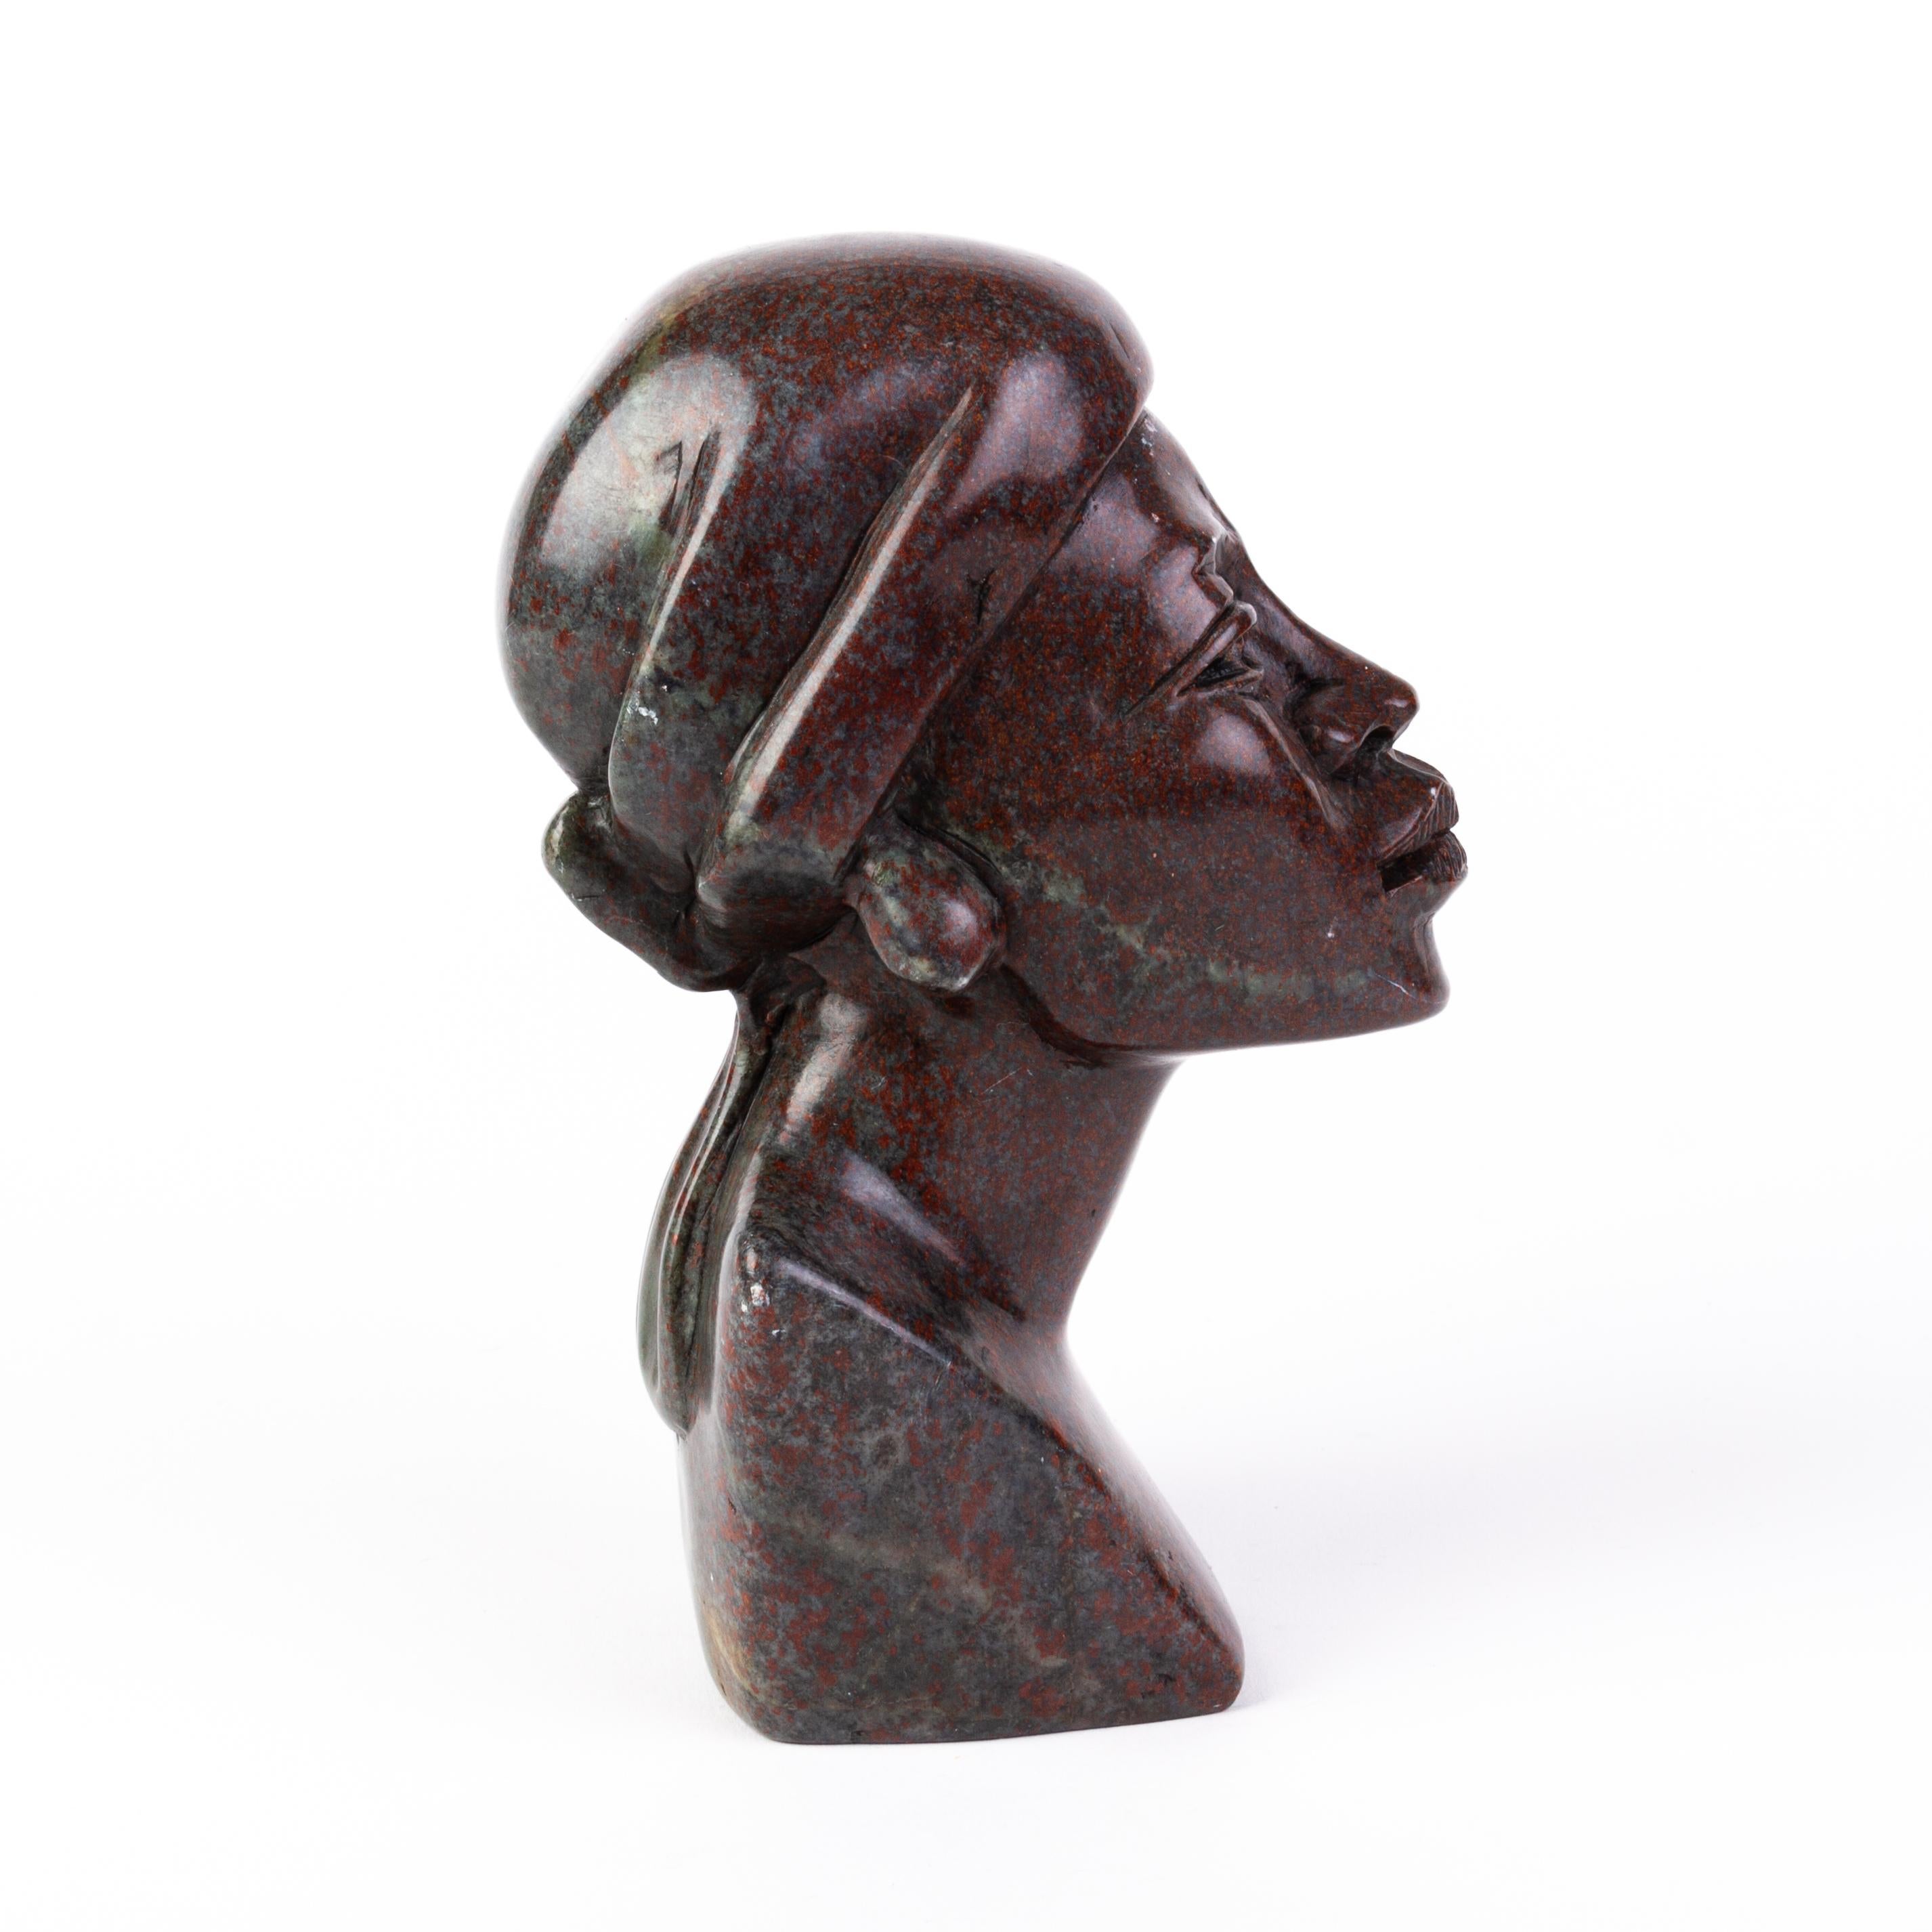 In good condition
From a private collection
Free international shipping
Carved African Bloodstone Bust Sculpture 